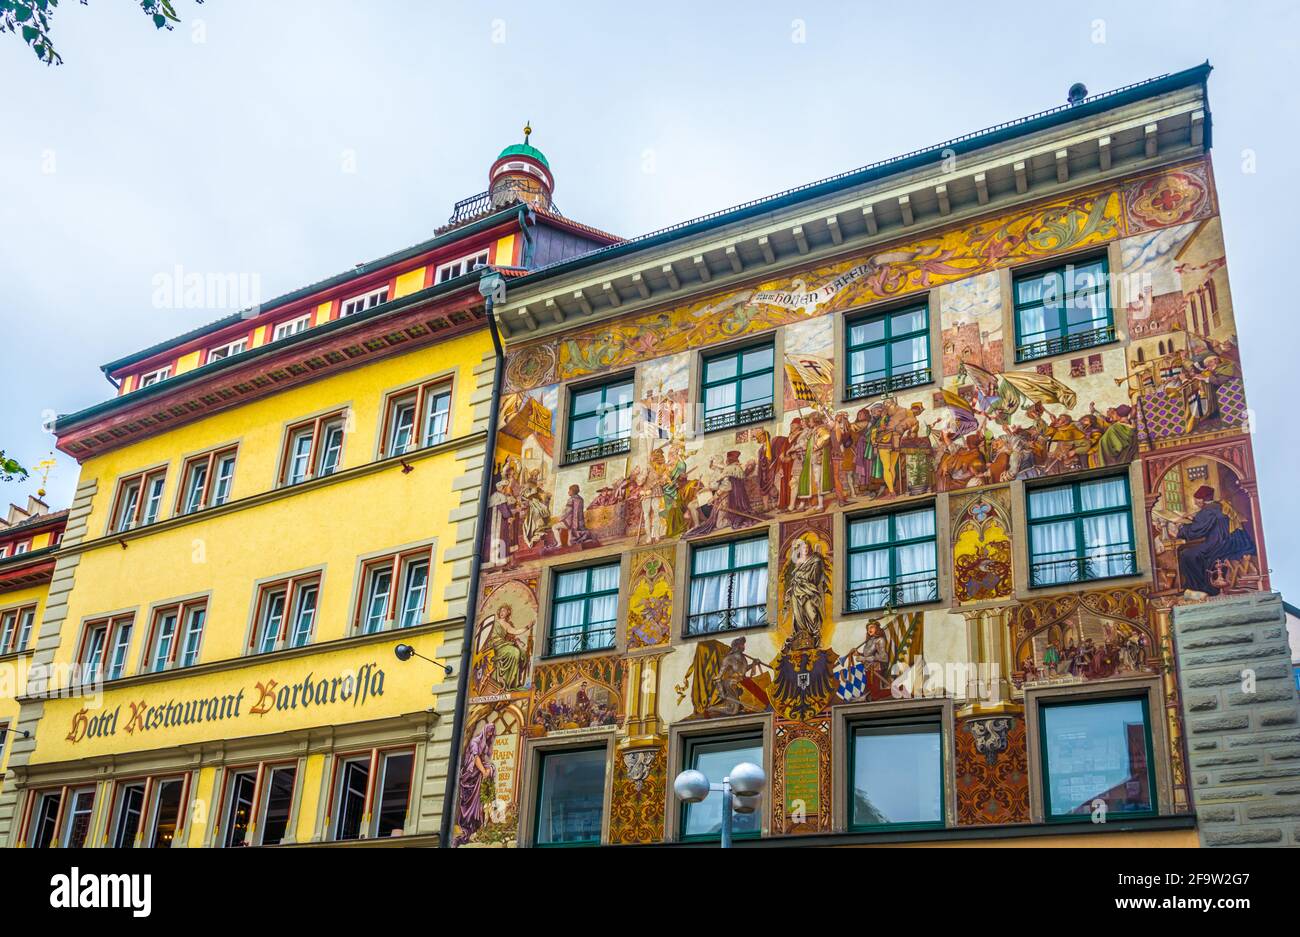 KONSTANZ, GERMANY, JULY 23, 2016: A Colorful house with an artistic facade in the german town Konstanz Stock Photo